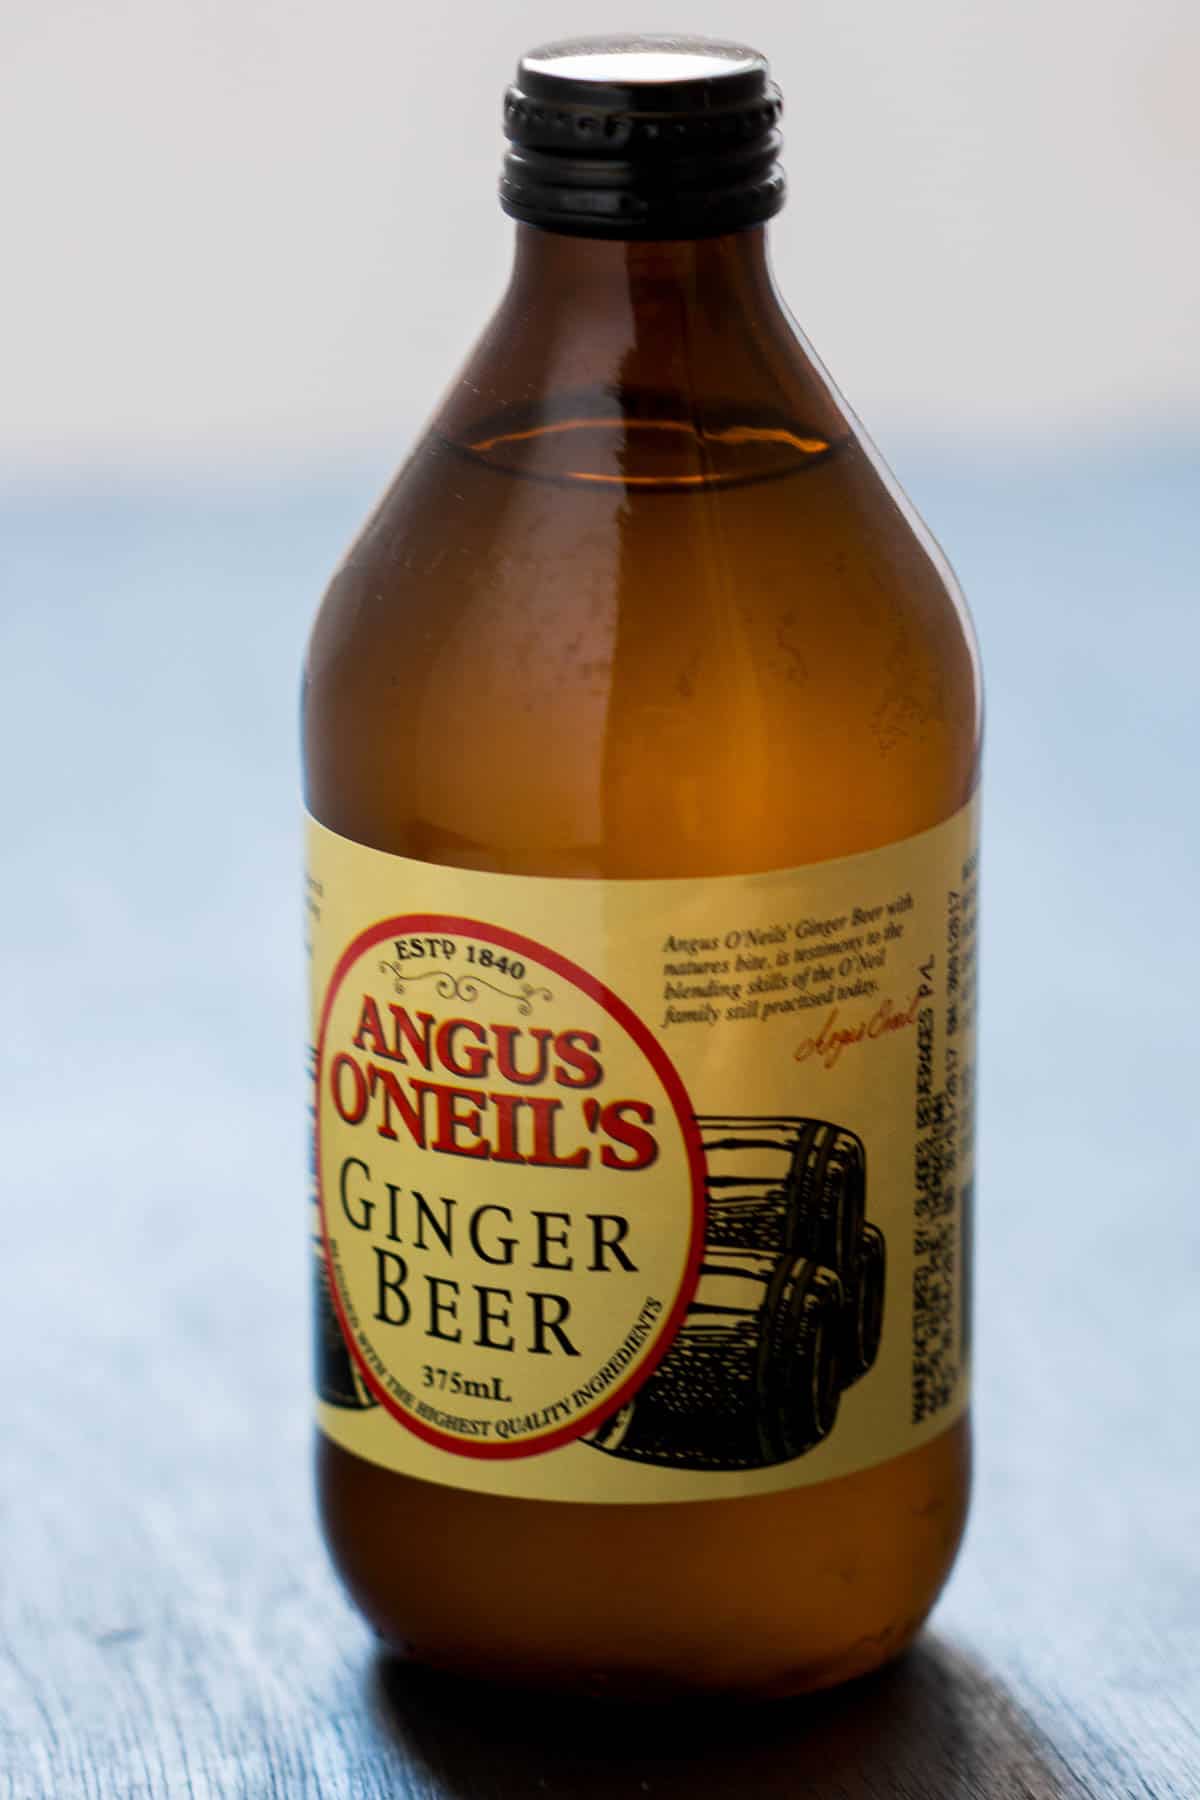 Angus O'Neil's ginger beer that gives the cocktail its flavor.